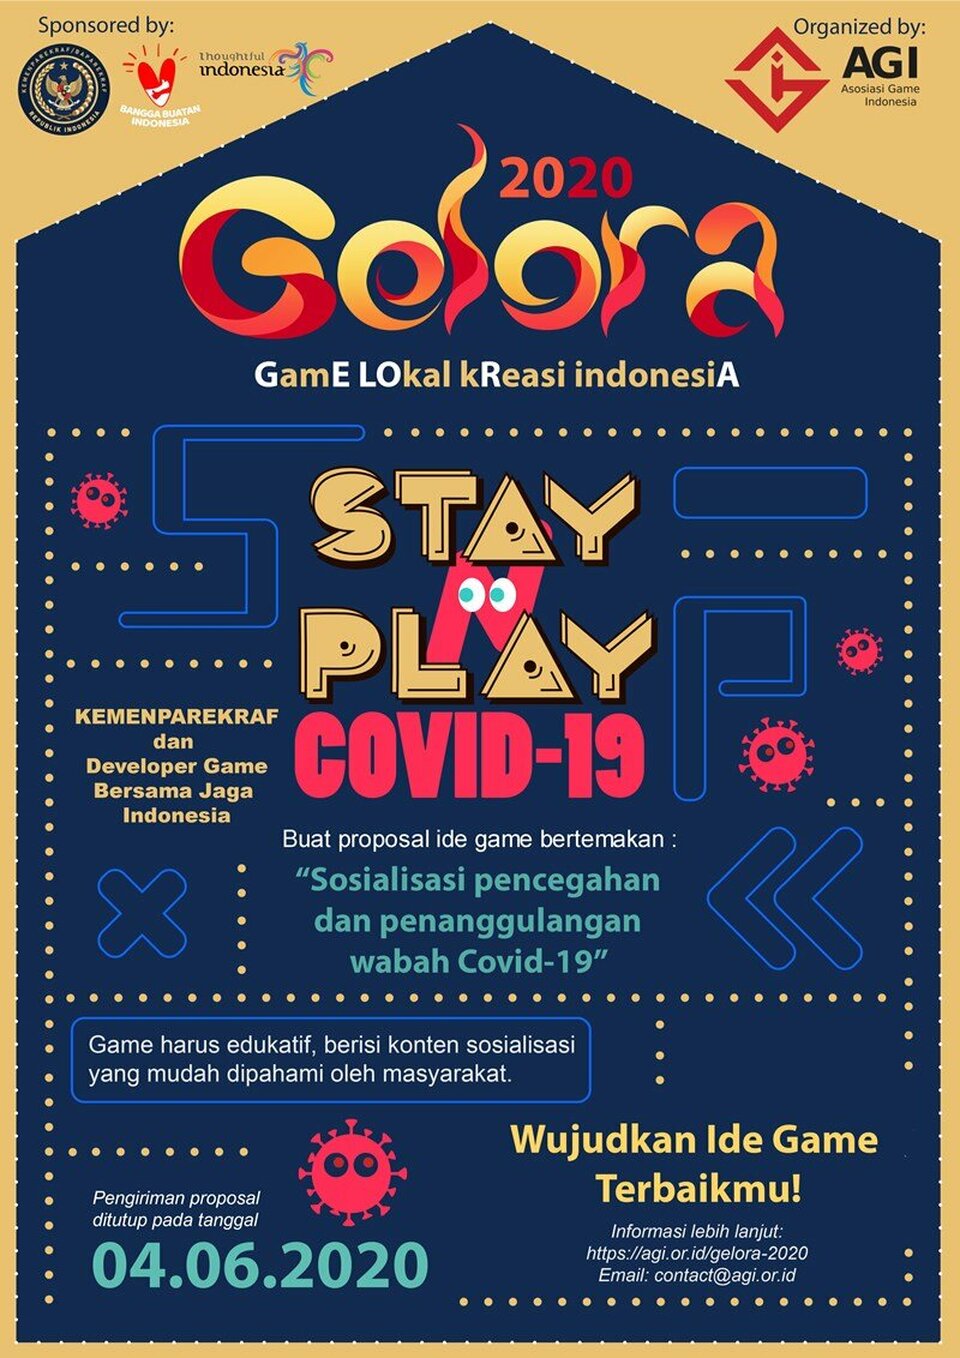 A poster for the game developer competition Game Lokal Kreasi Indonesia (Gelora) 2020. (Photo courtesy of the Indonesian Games Association)